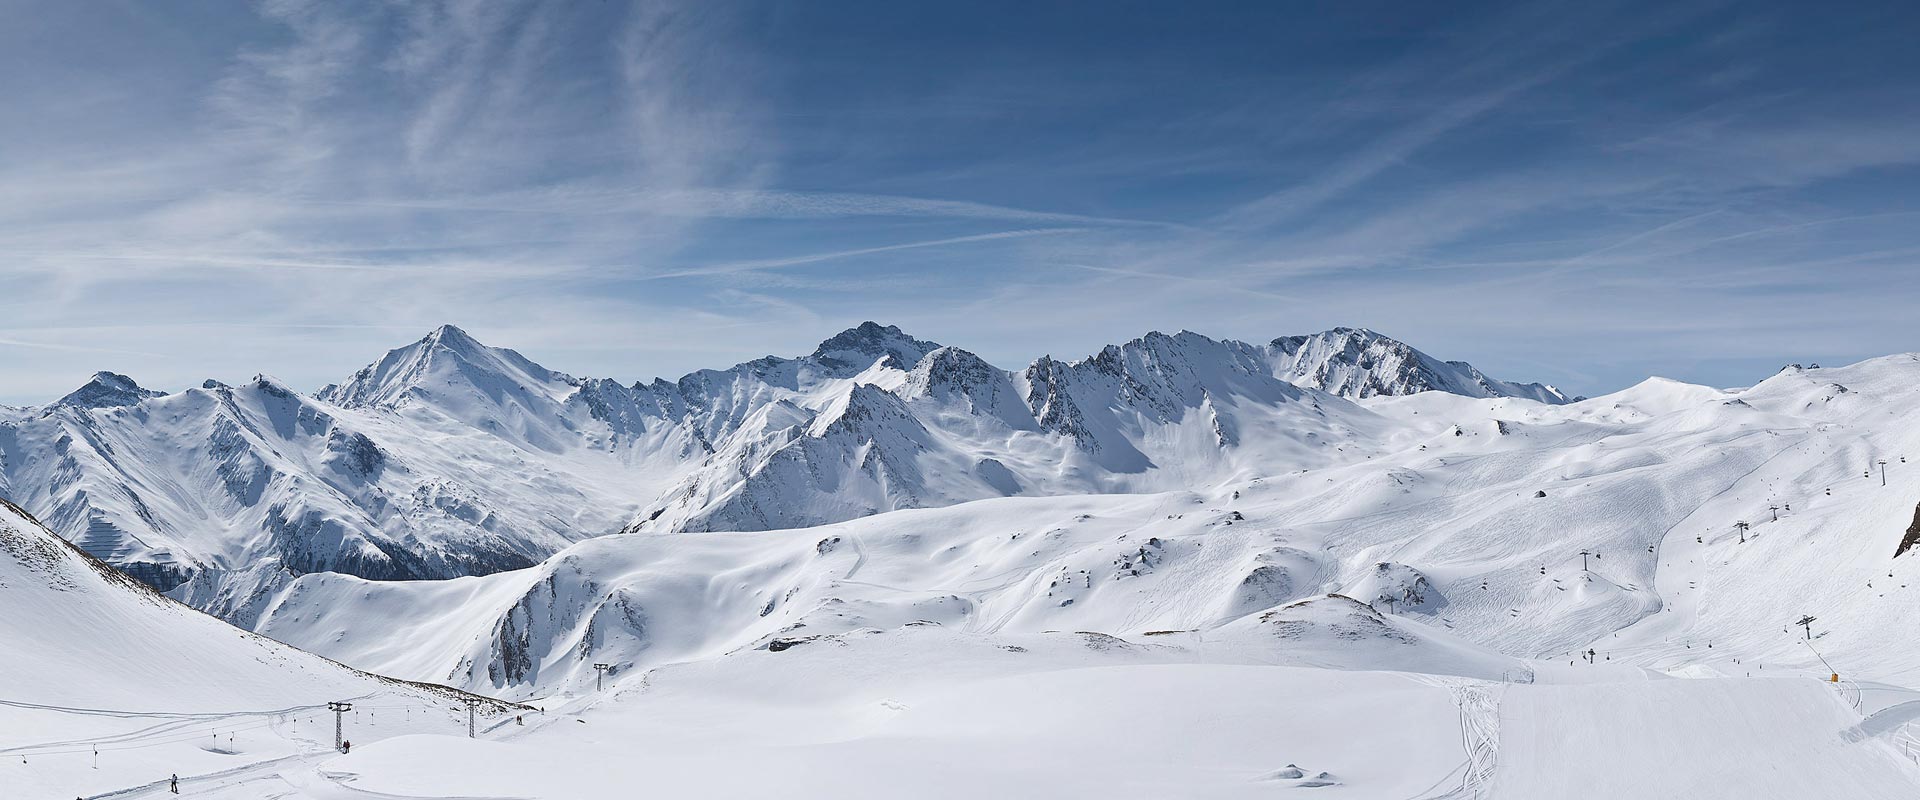 Only the best skiing and snowboarding experience at the Samnaun ski resort